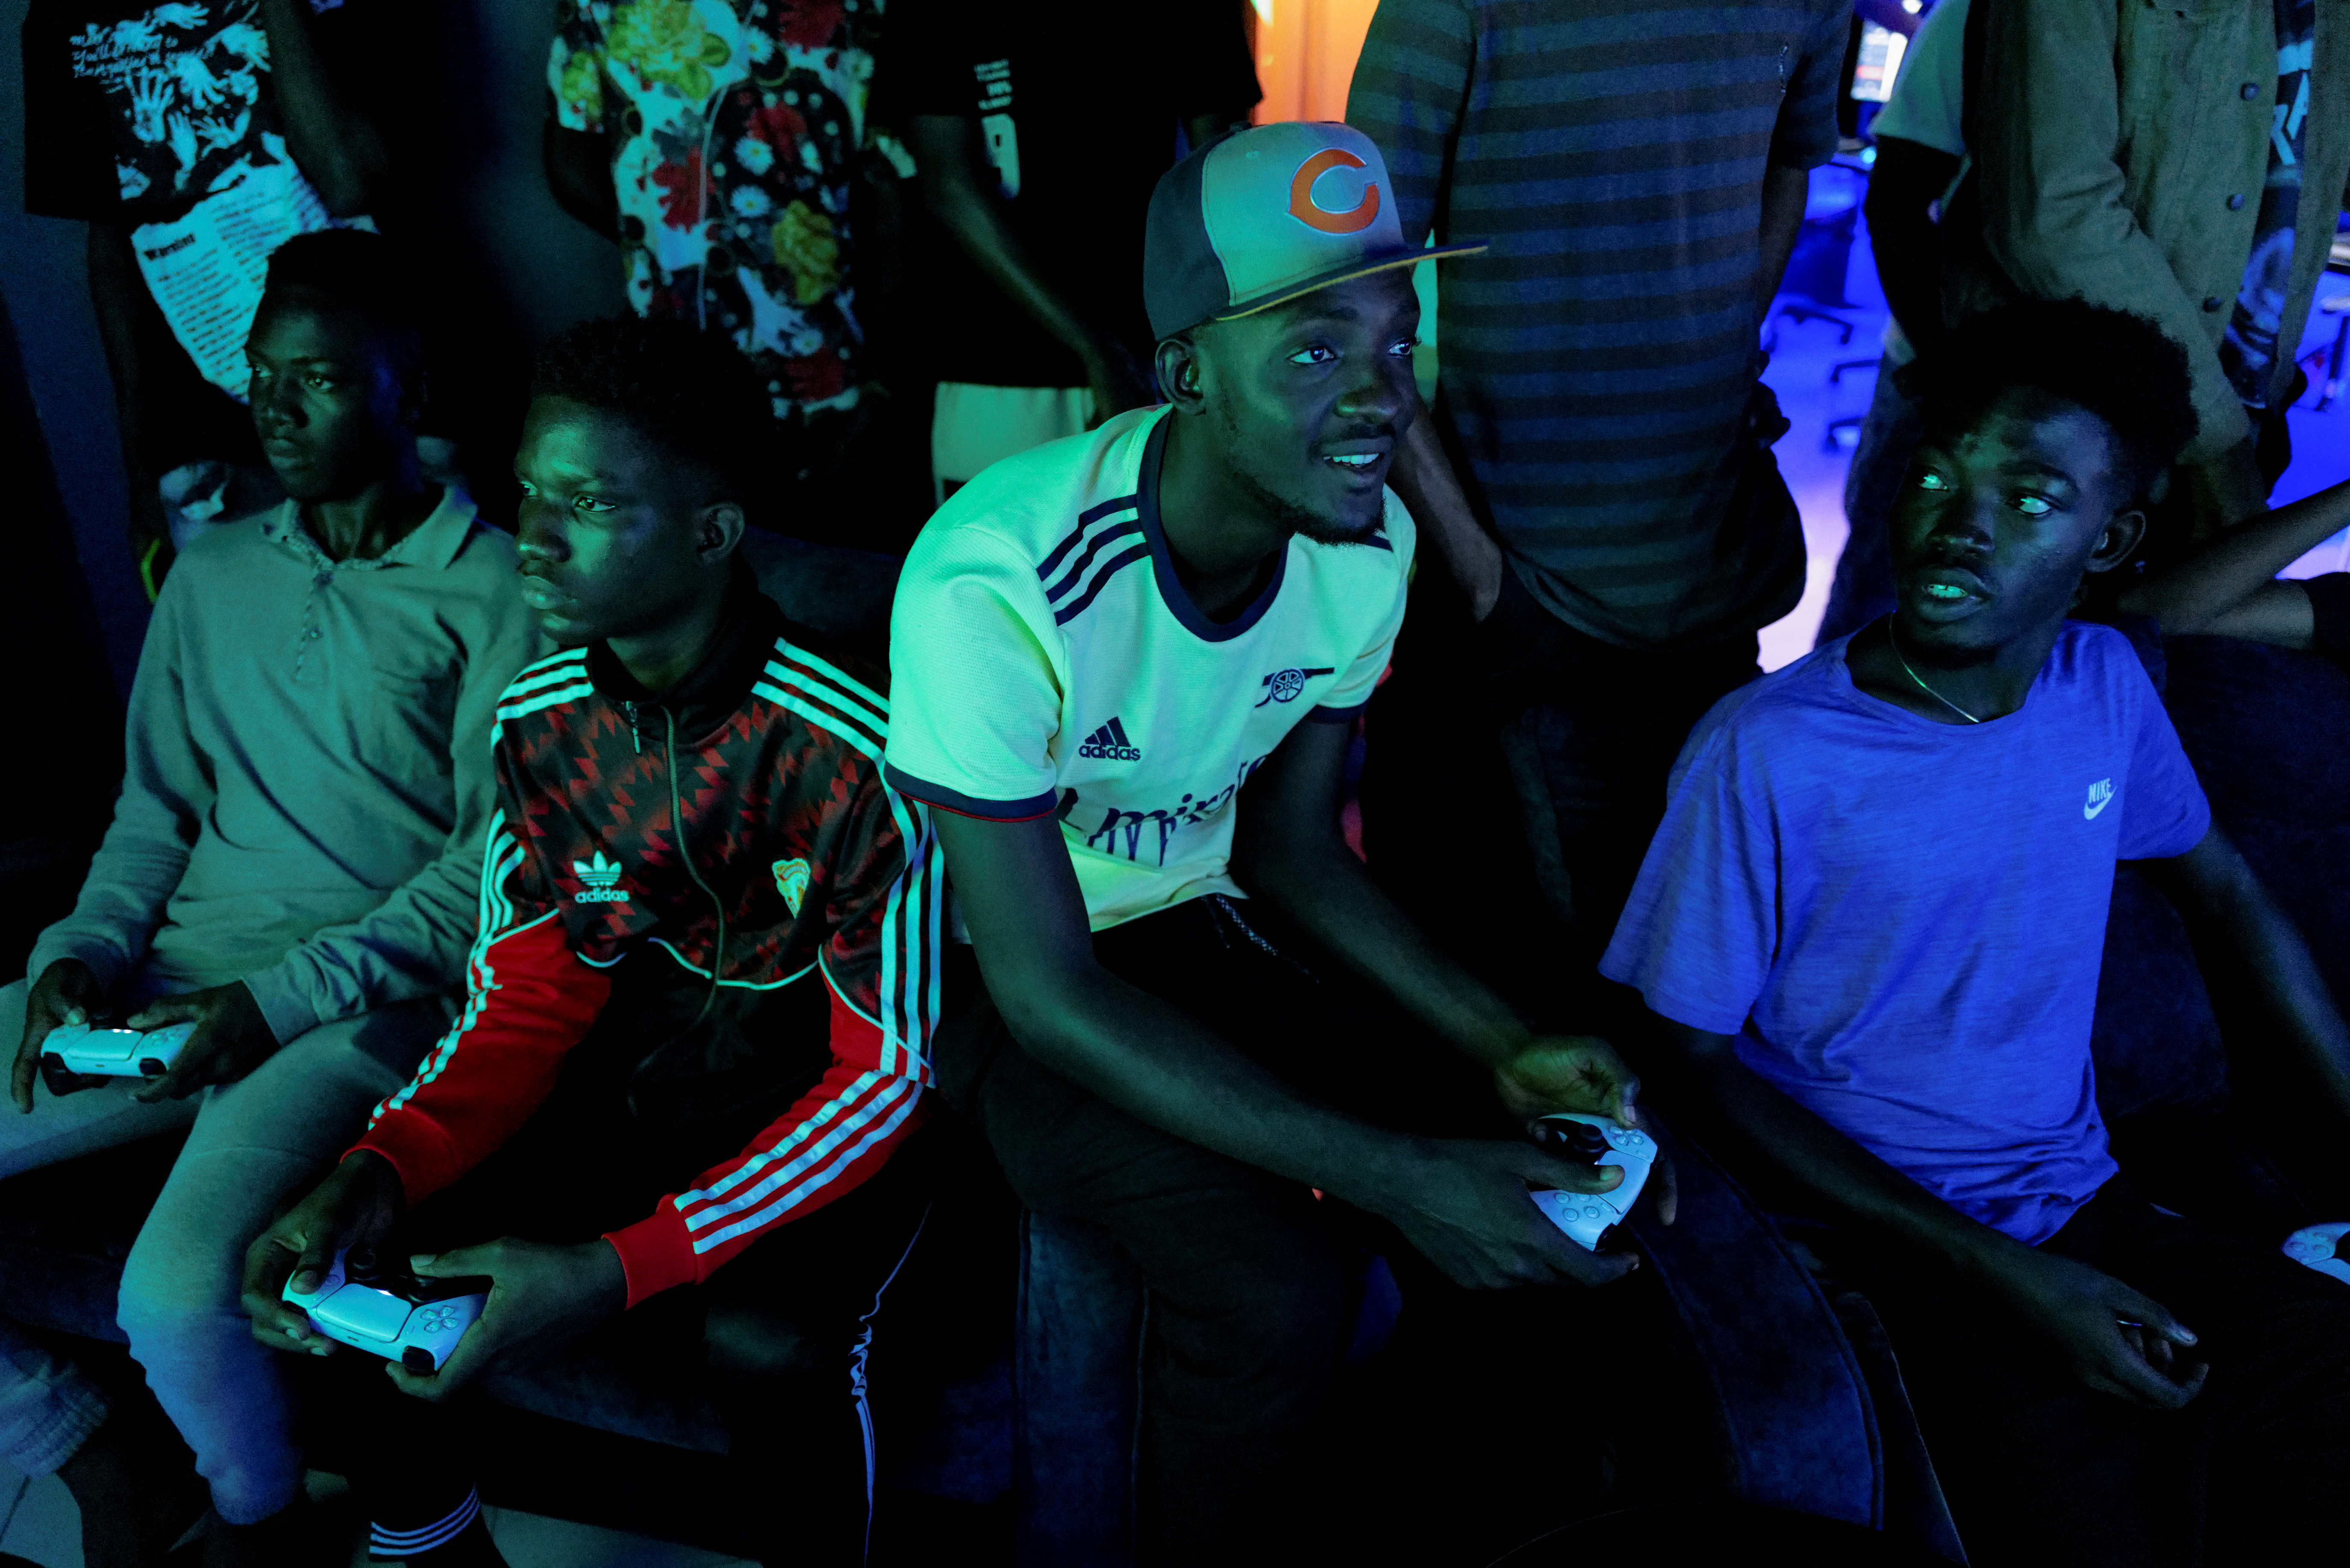 British-Ghanaian gaming collective offers safe haven for global gamers of diversity